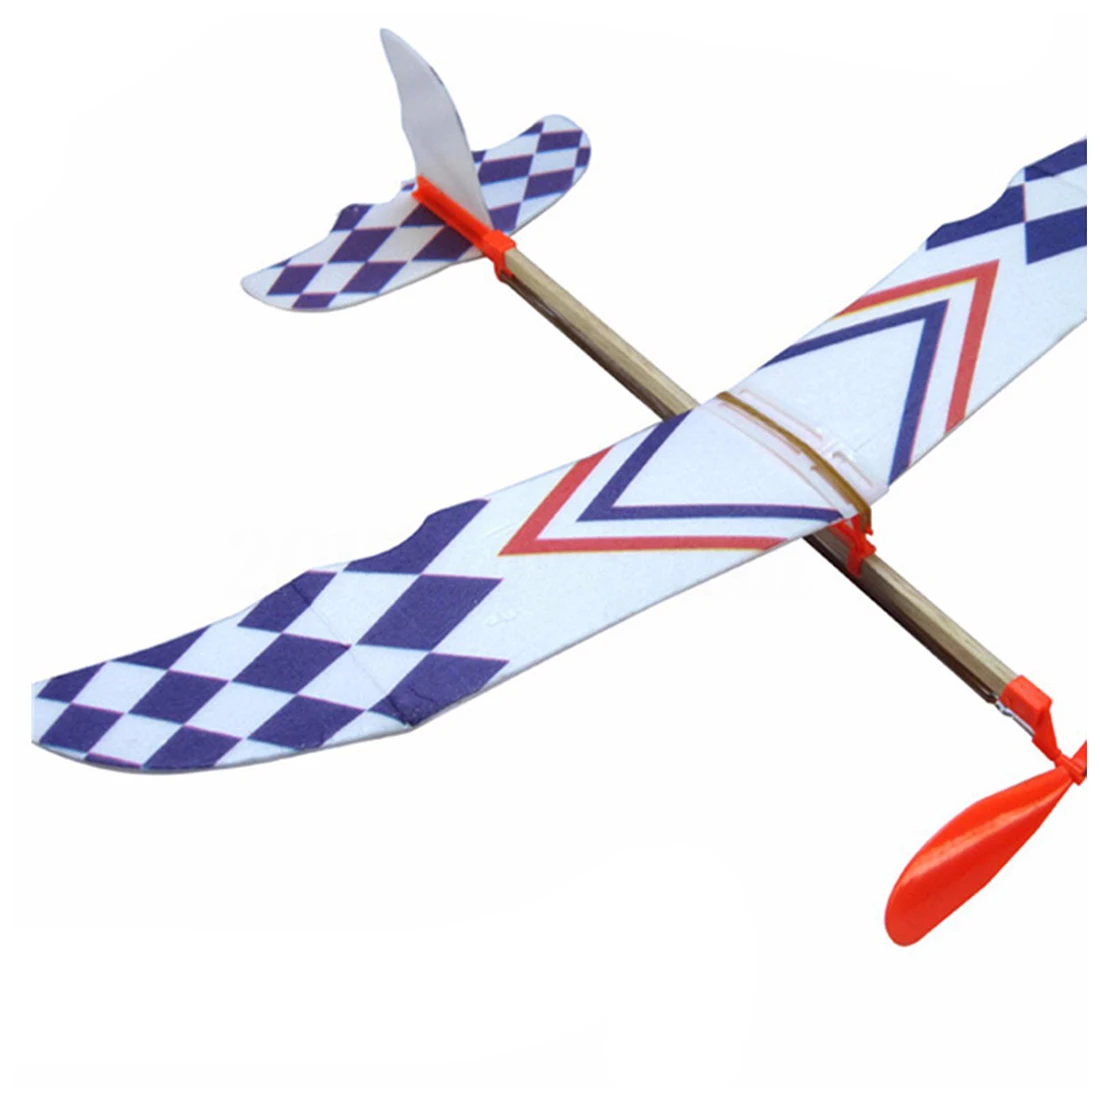 Fun Colorful Prettyia Airplane Rubber Band Power Model Foam Airplane challenging Outdoor Sports Toy 